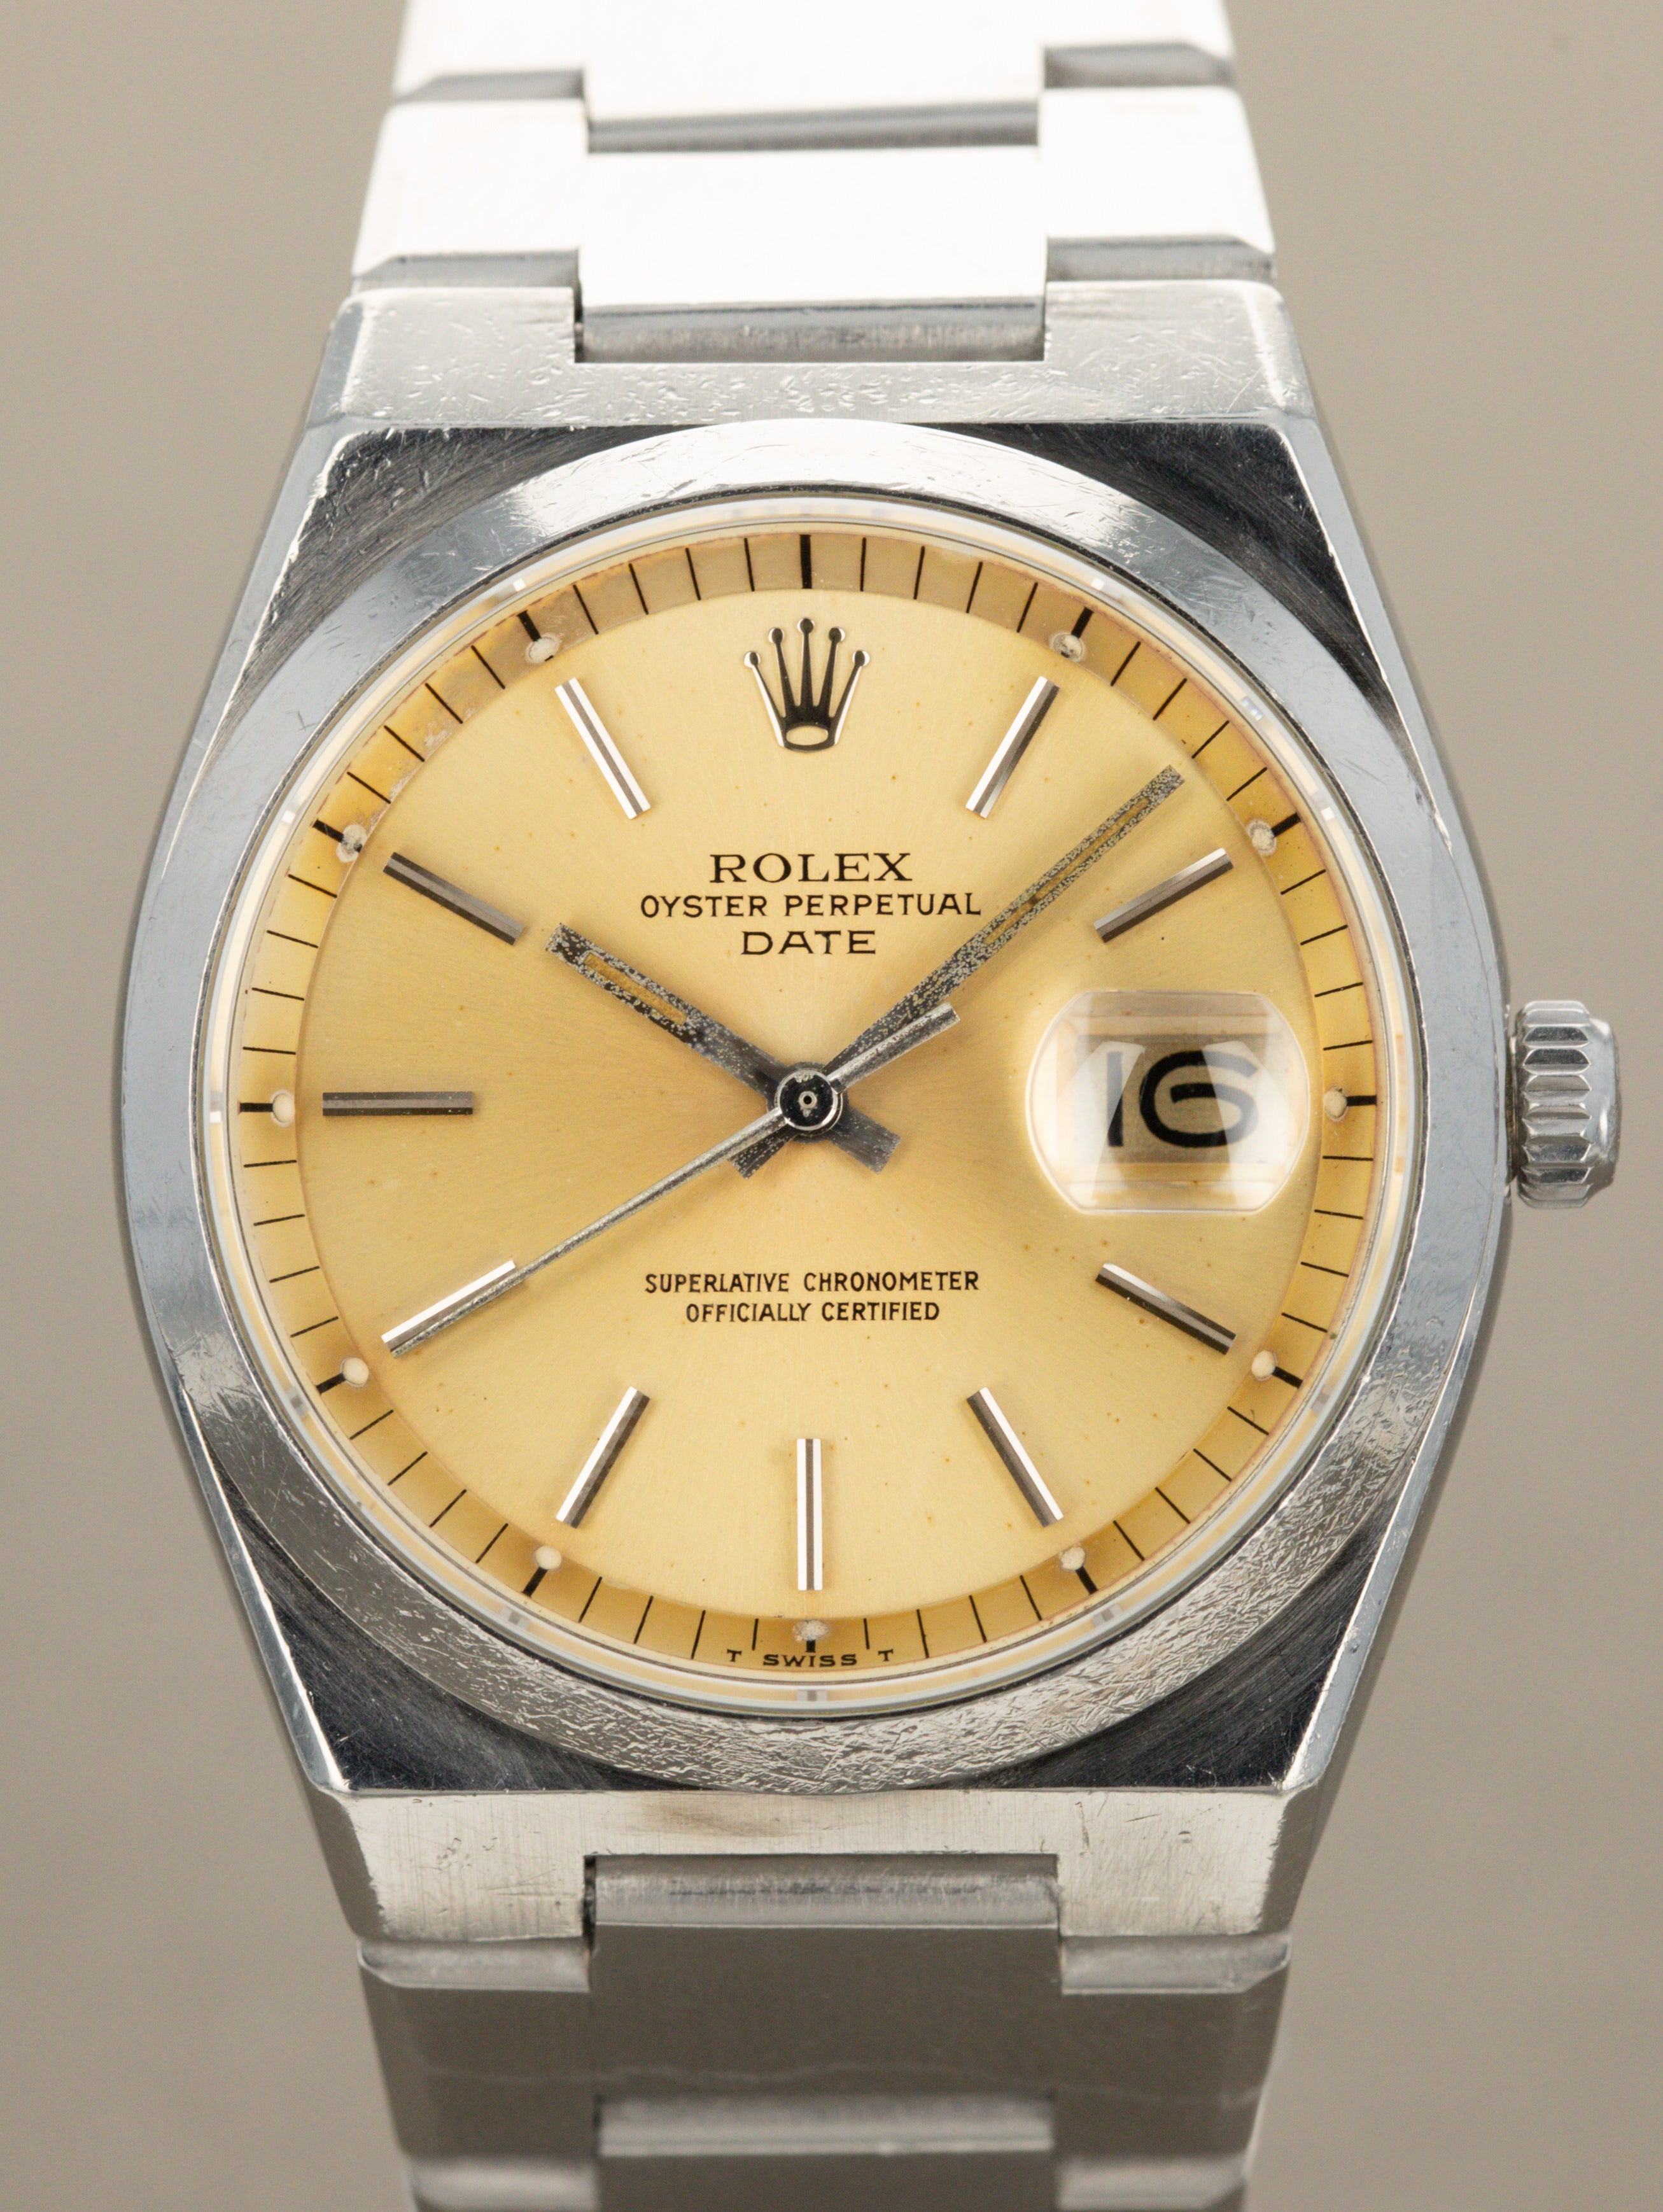 Rolex Oyster Perpetual Date Ref. 1530 - Patina Dial